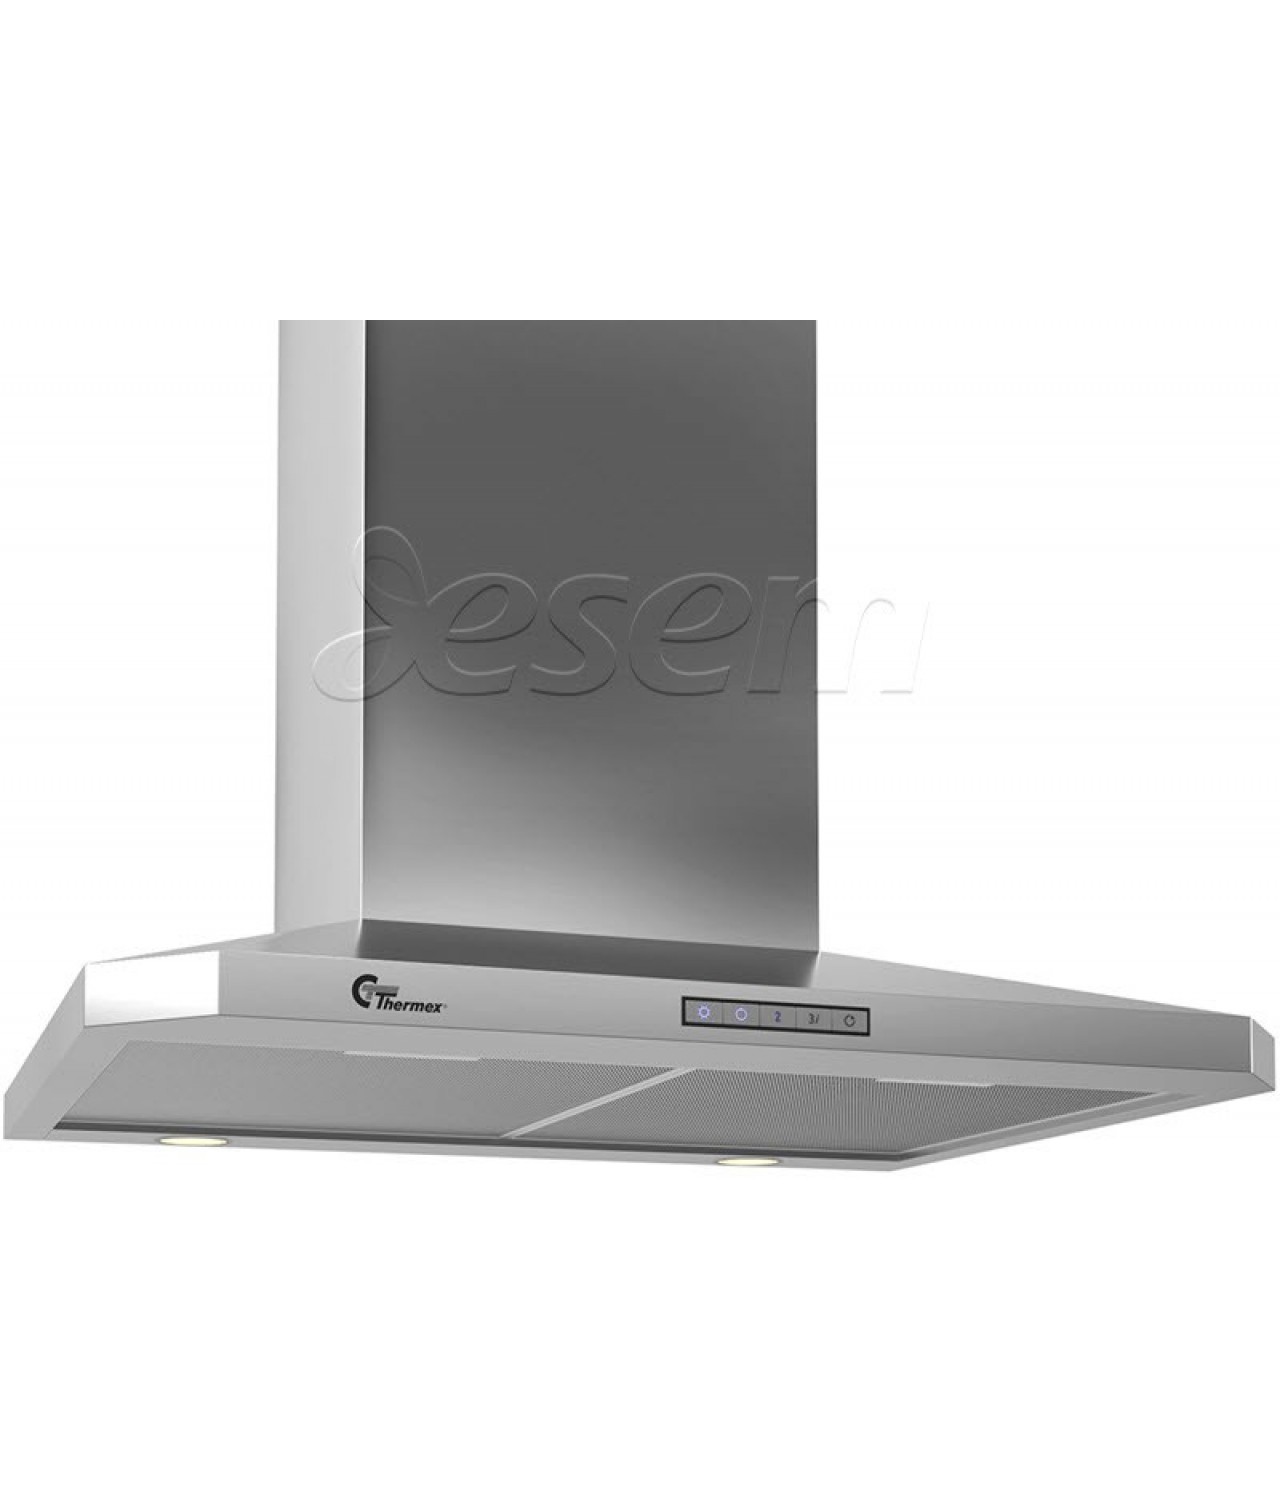 Wall mounted cooker hoods Decor 787 stainless steel 600 mm